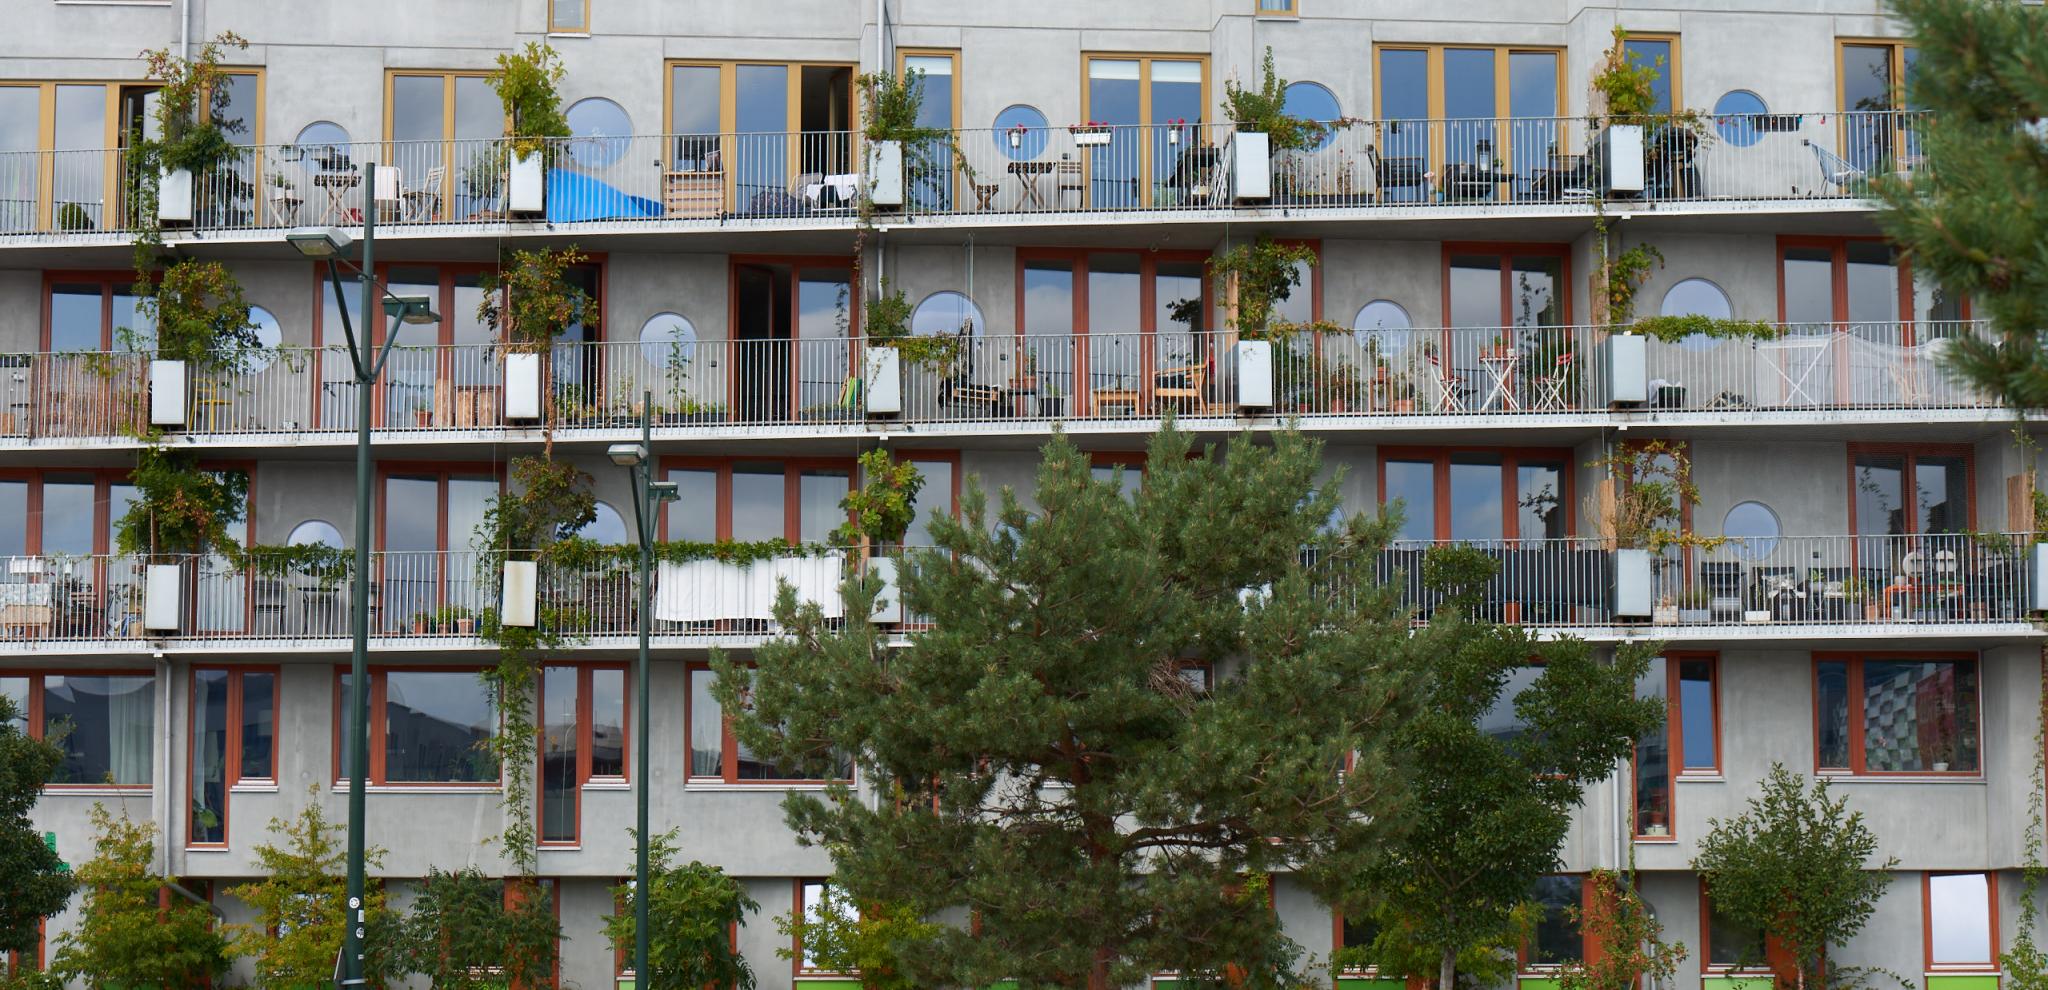 The grey exterior of the OHboy hotel in Malmö with trees in front